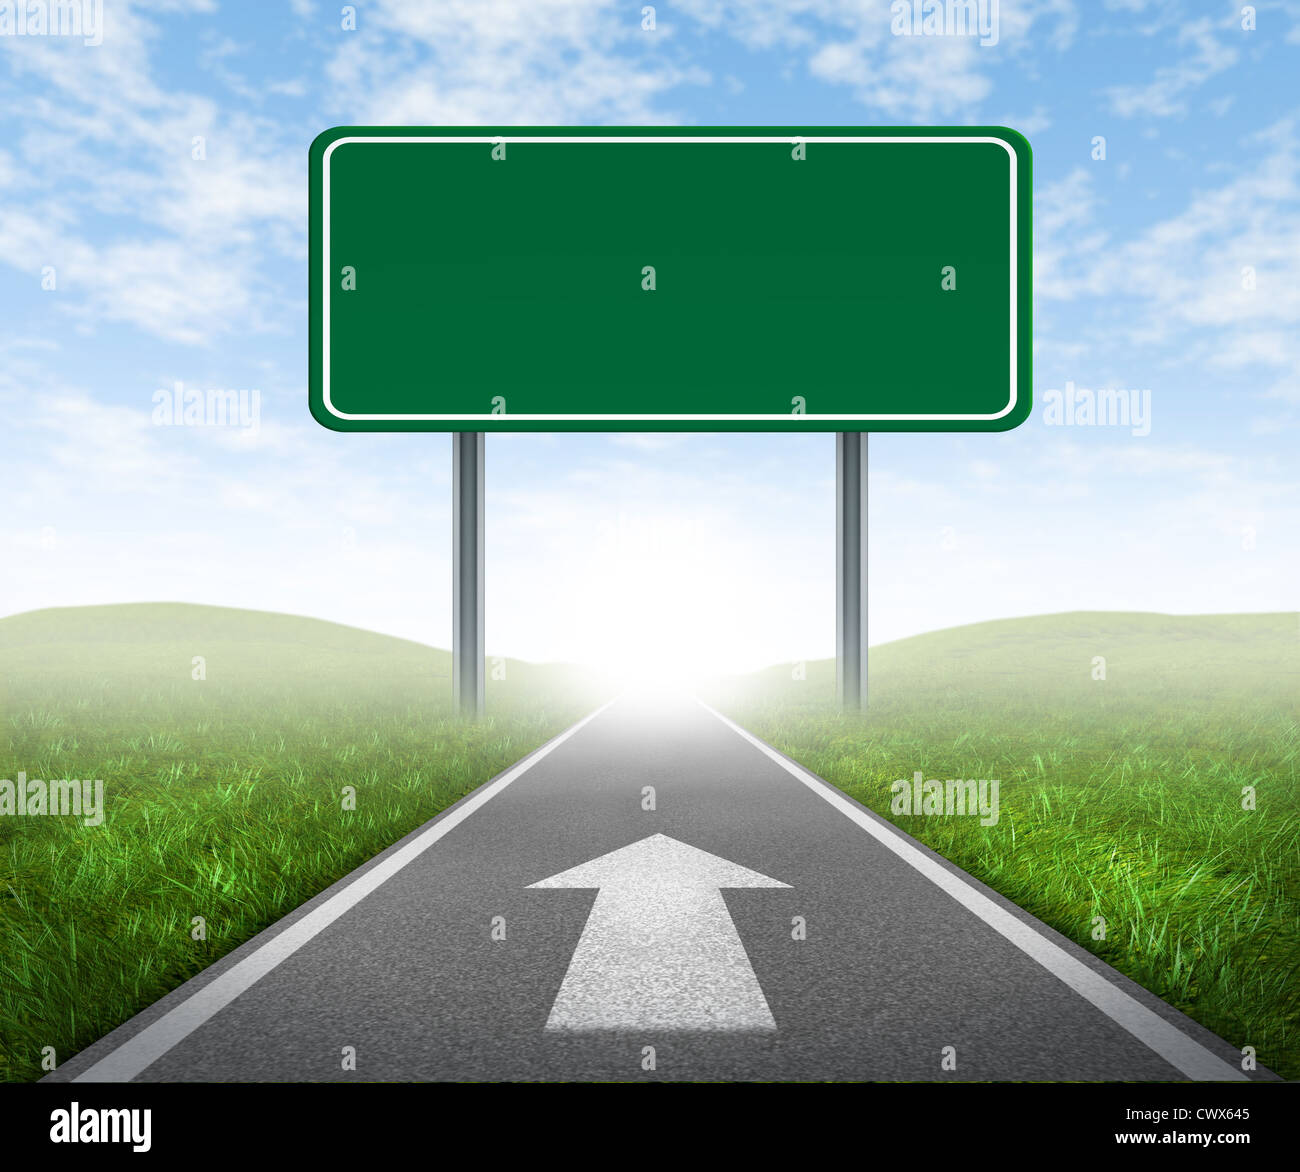 Clear goals on an open straight road highway sign with green grass and asphalt street representing the concept of journey to a focused destination resulting in success and happiness with an arrow on the pavement. Stock Photo